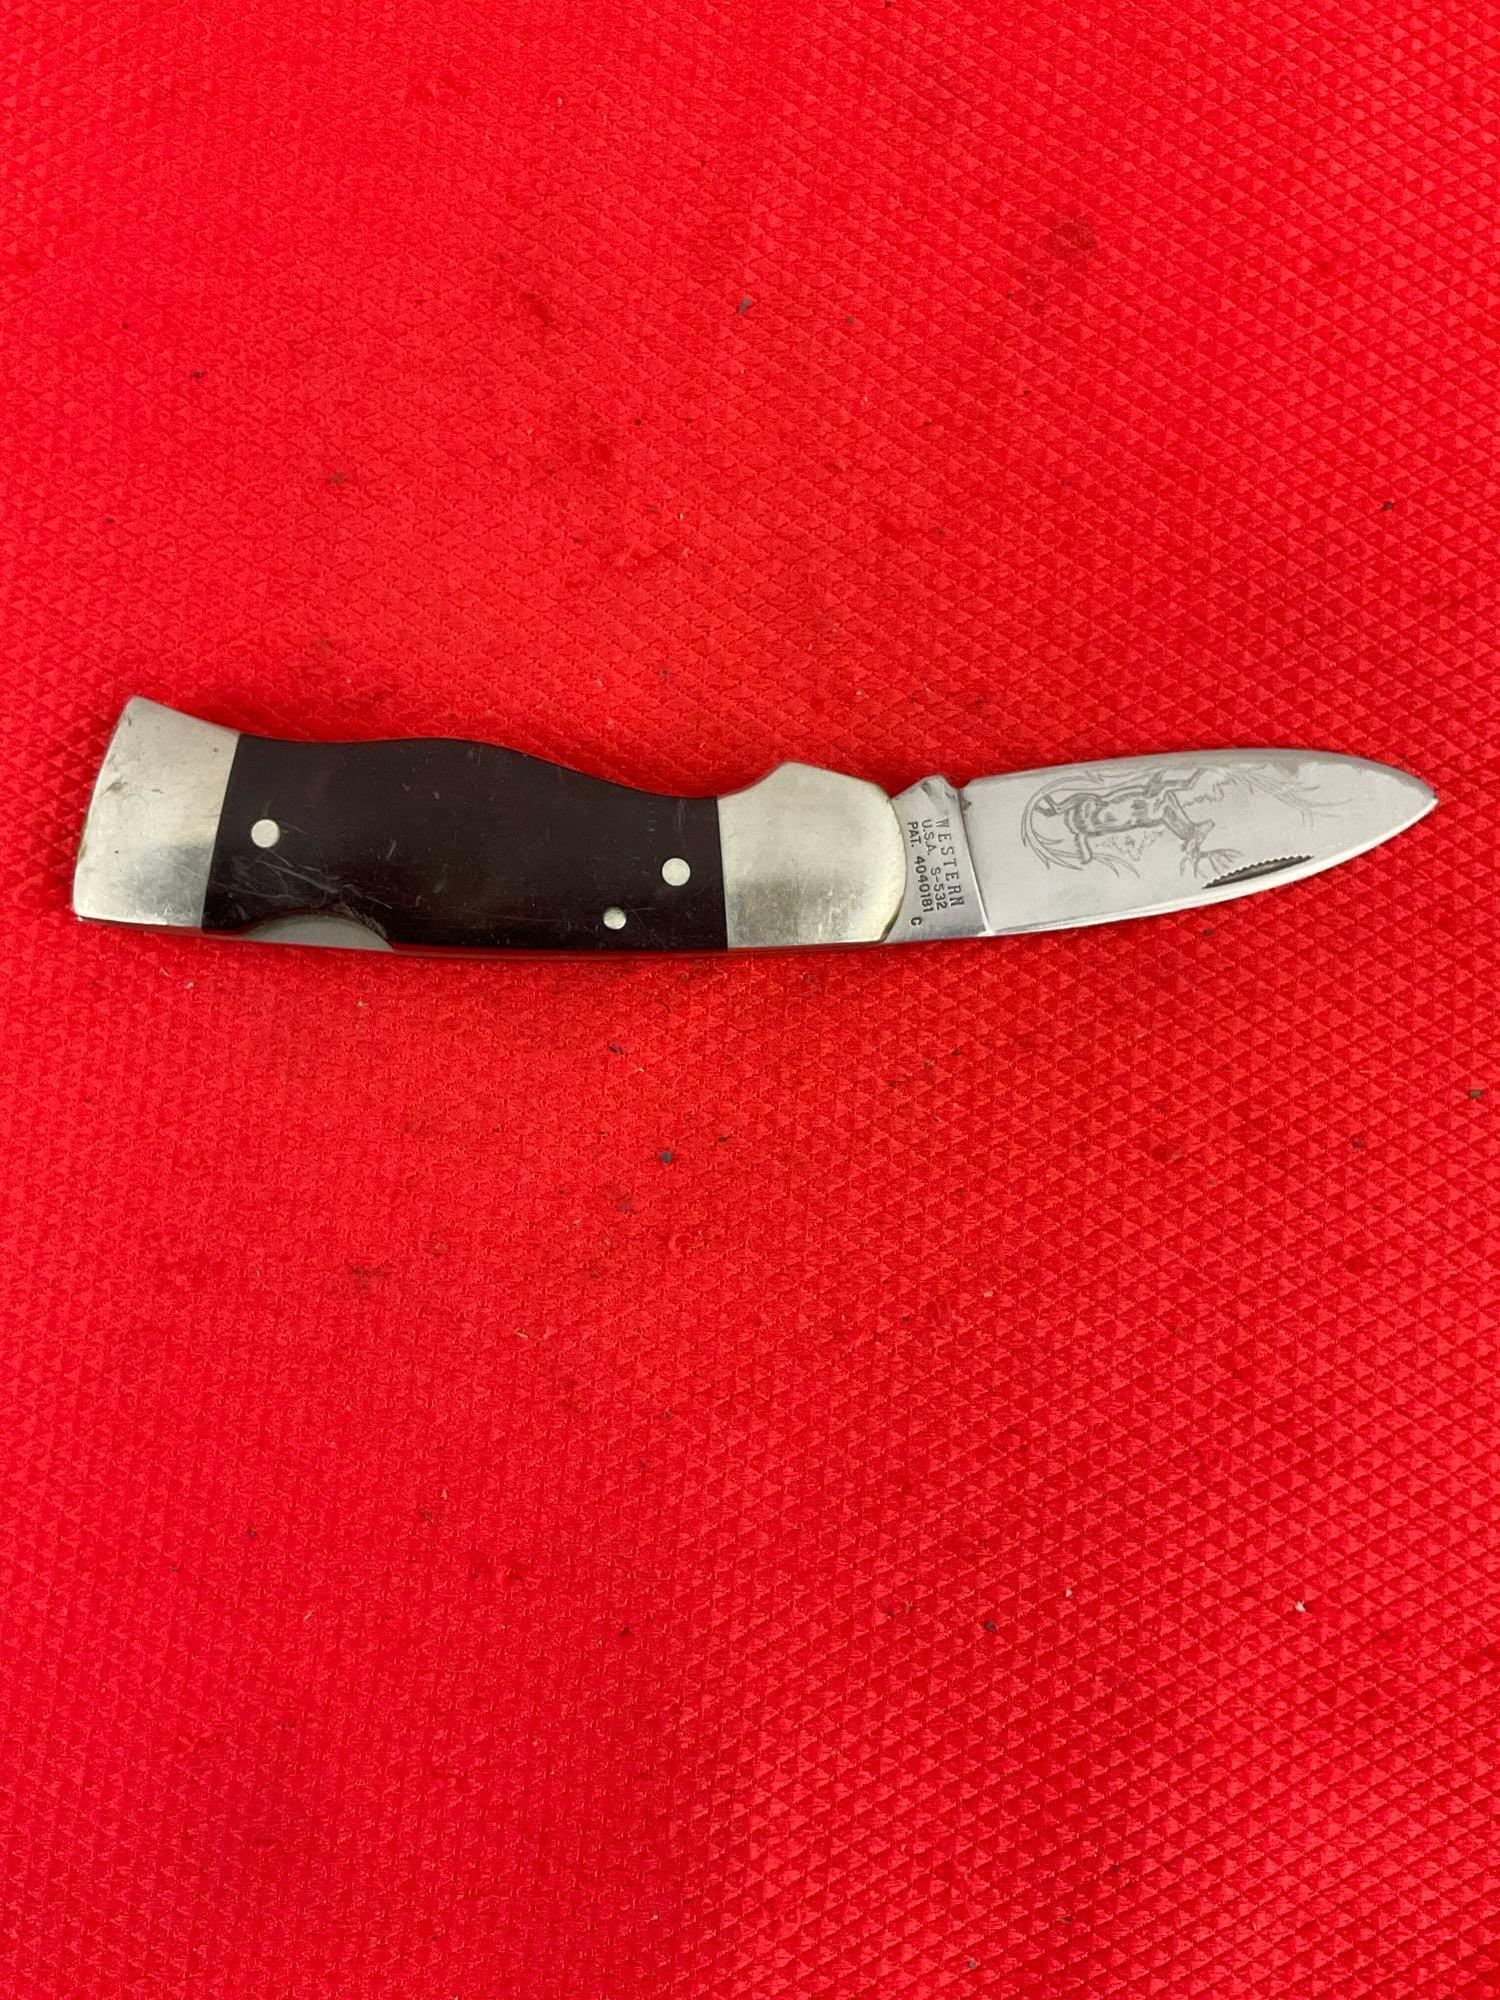 Vintage Western 2.75" Steel Folding Blade Pocket Knife S-532 w/ Etching of Stag & Sheath. See pics.